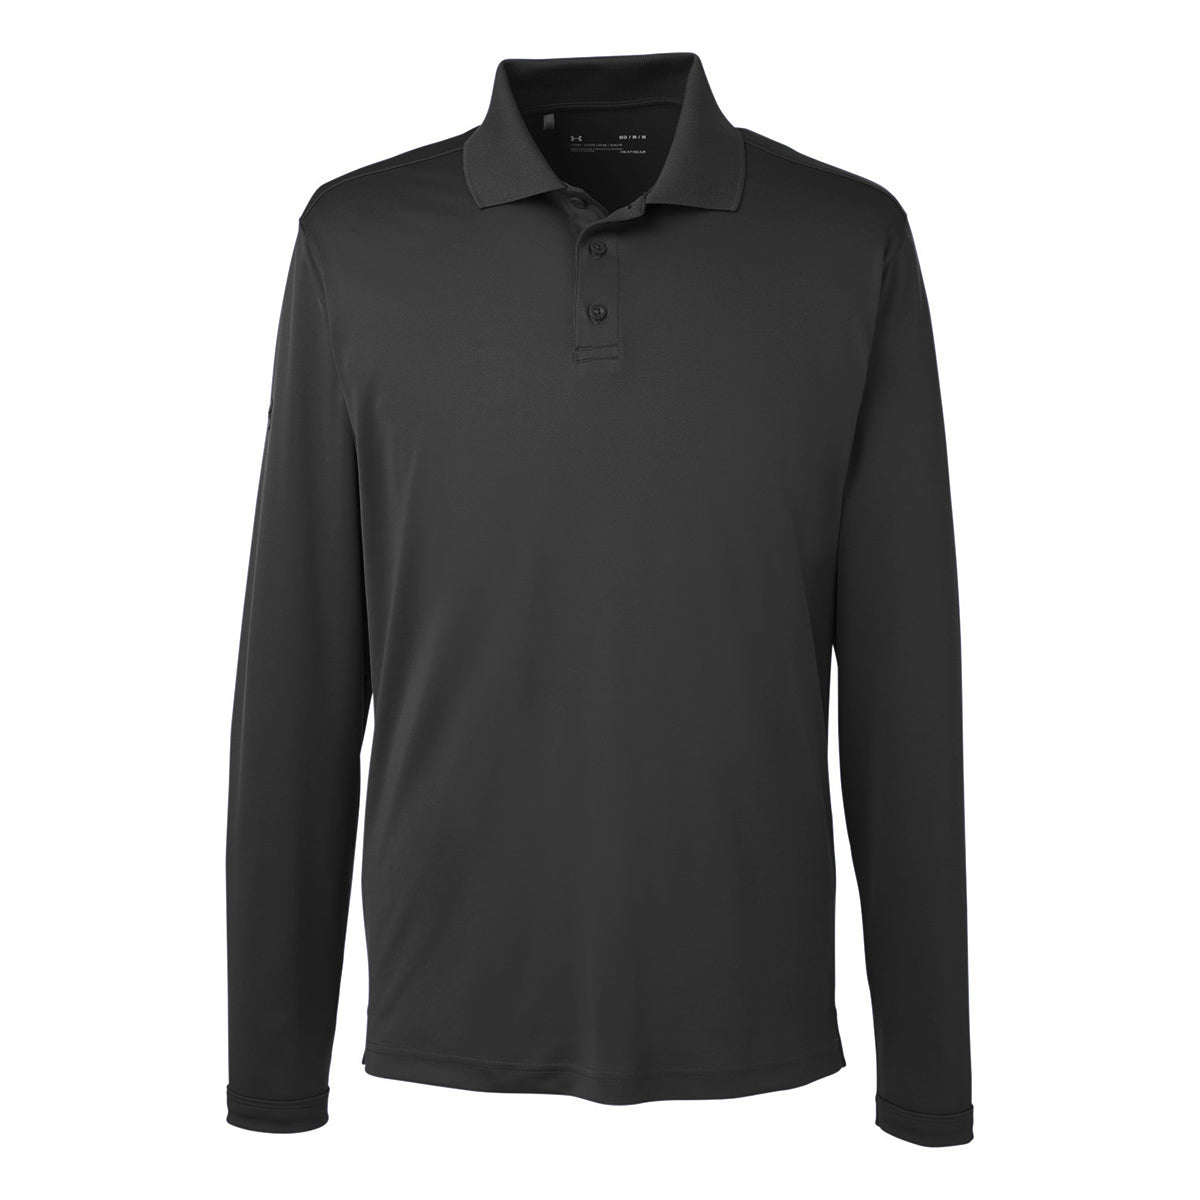 Image of Under Armour Men's Long Sleeve 2.0 Performance Polo